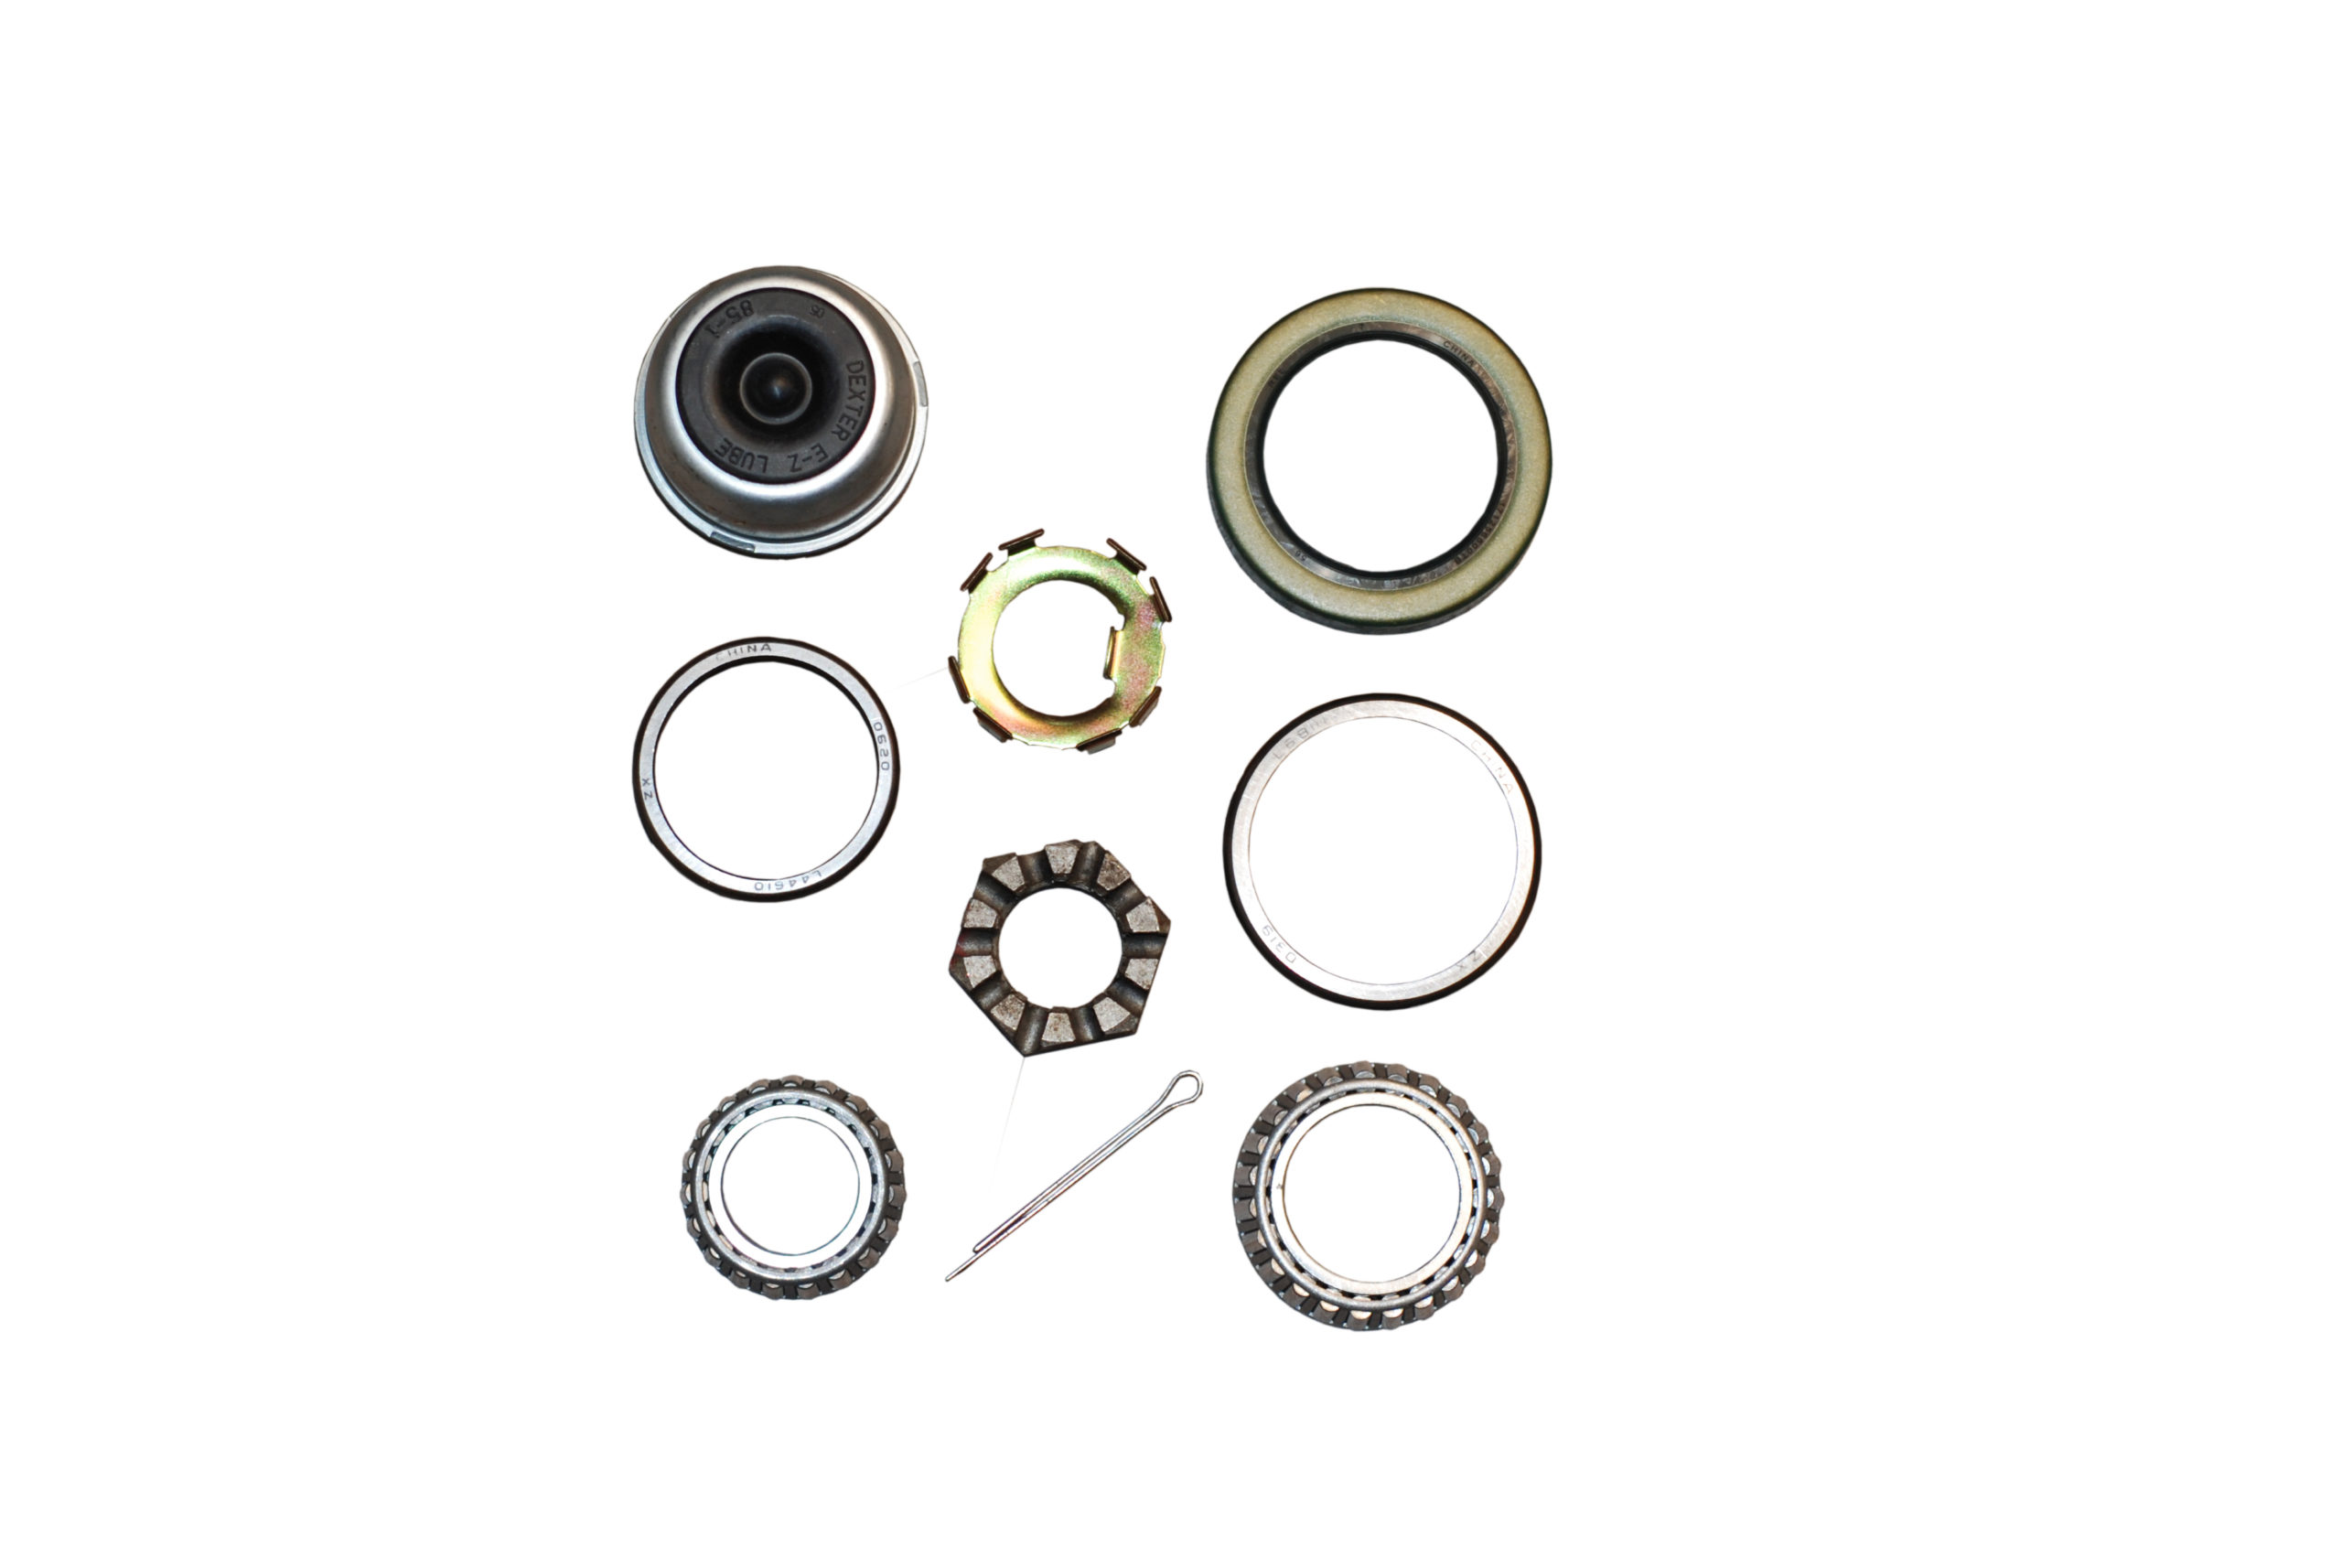 Bearing Kit for 3500 Lbs. Axle (For 1 Side Only)